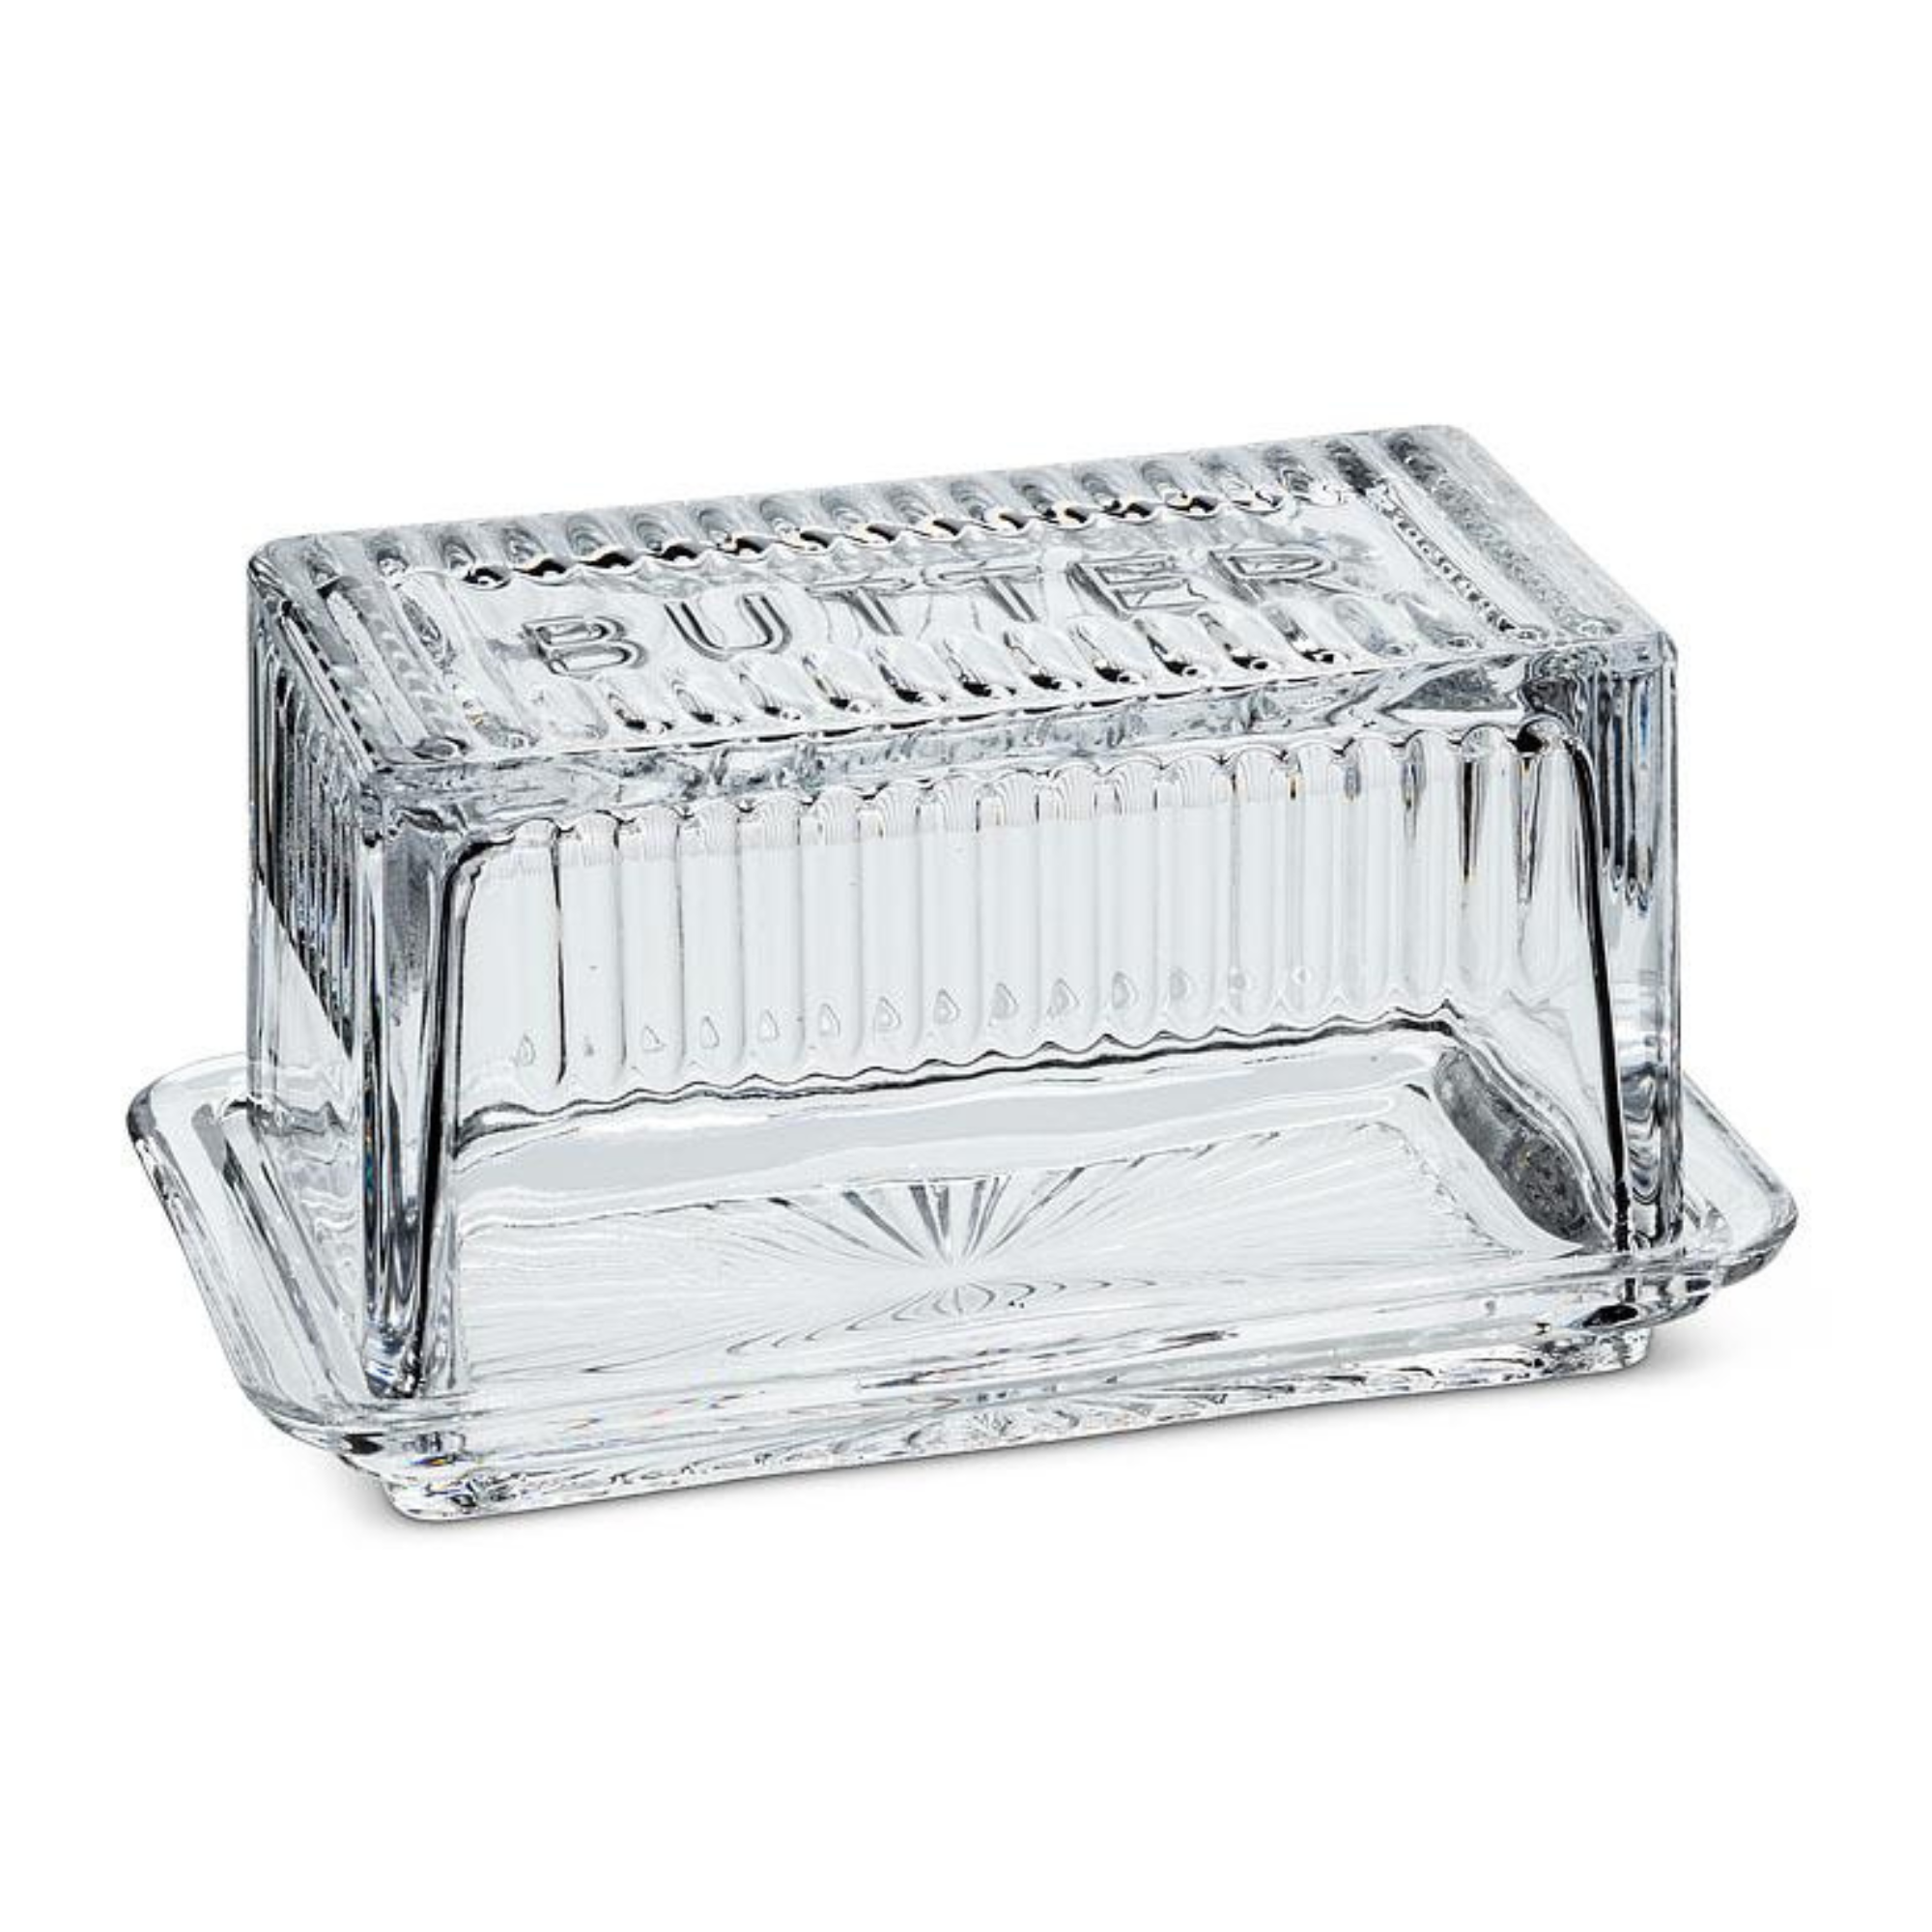 Covered Butter Dish - 1 Lb